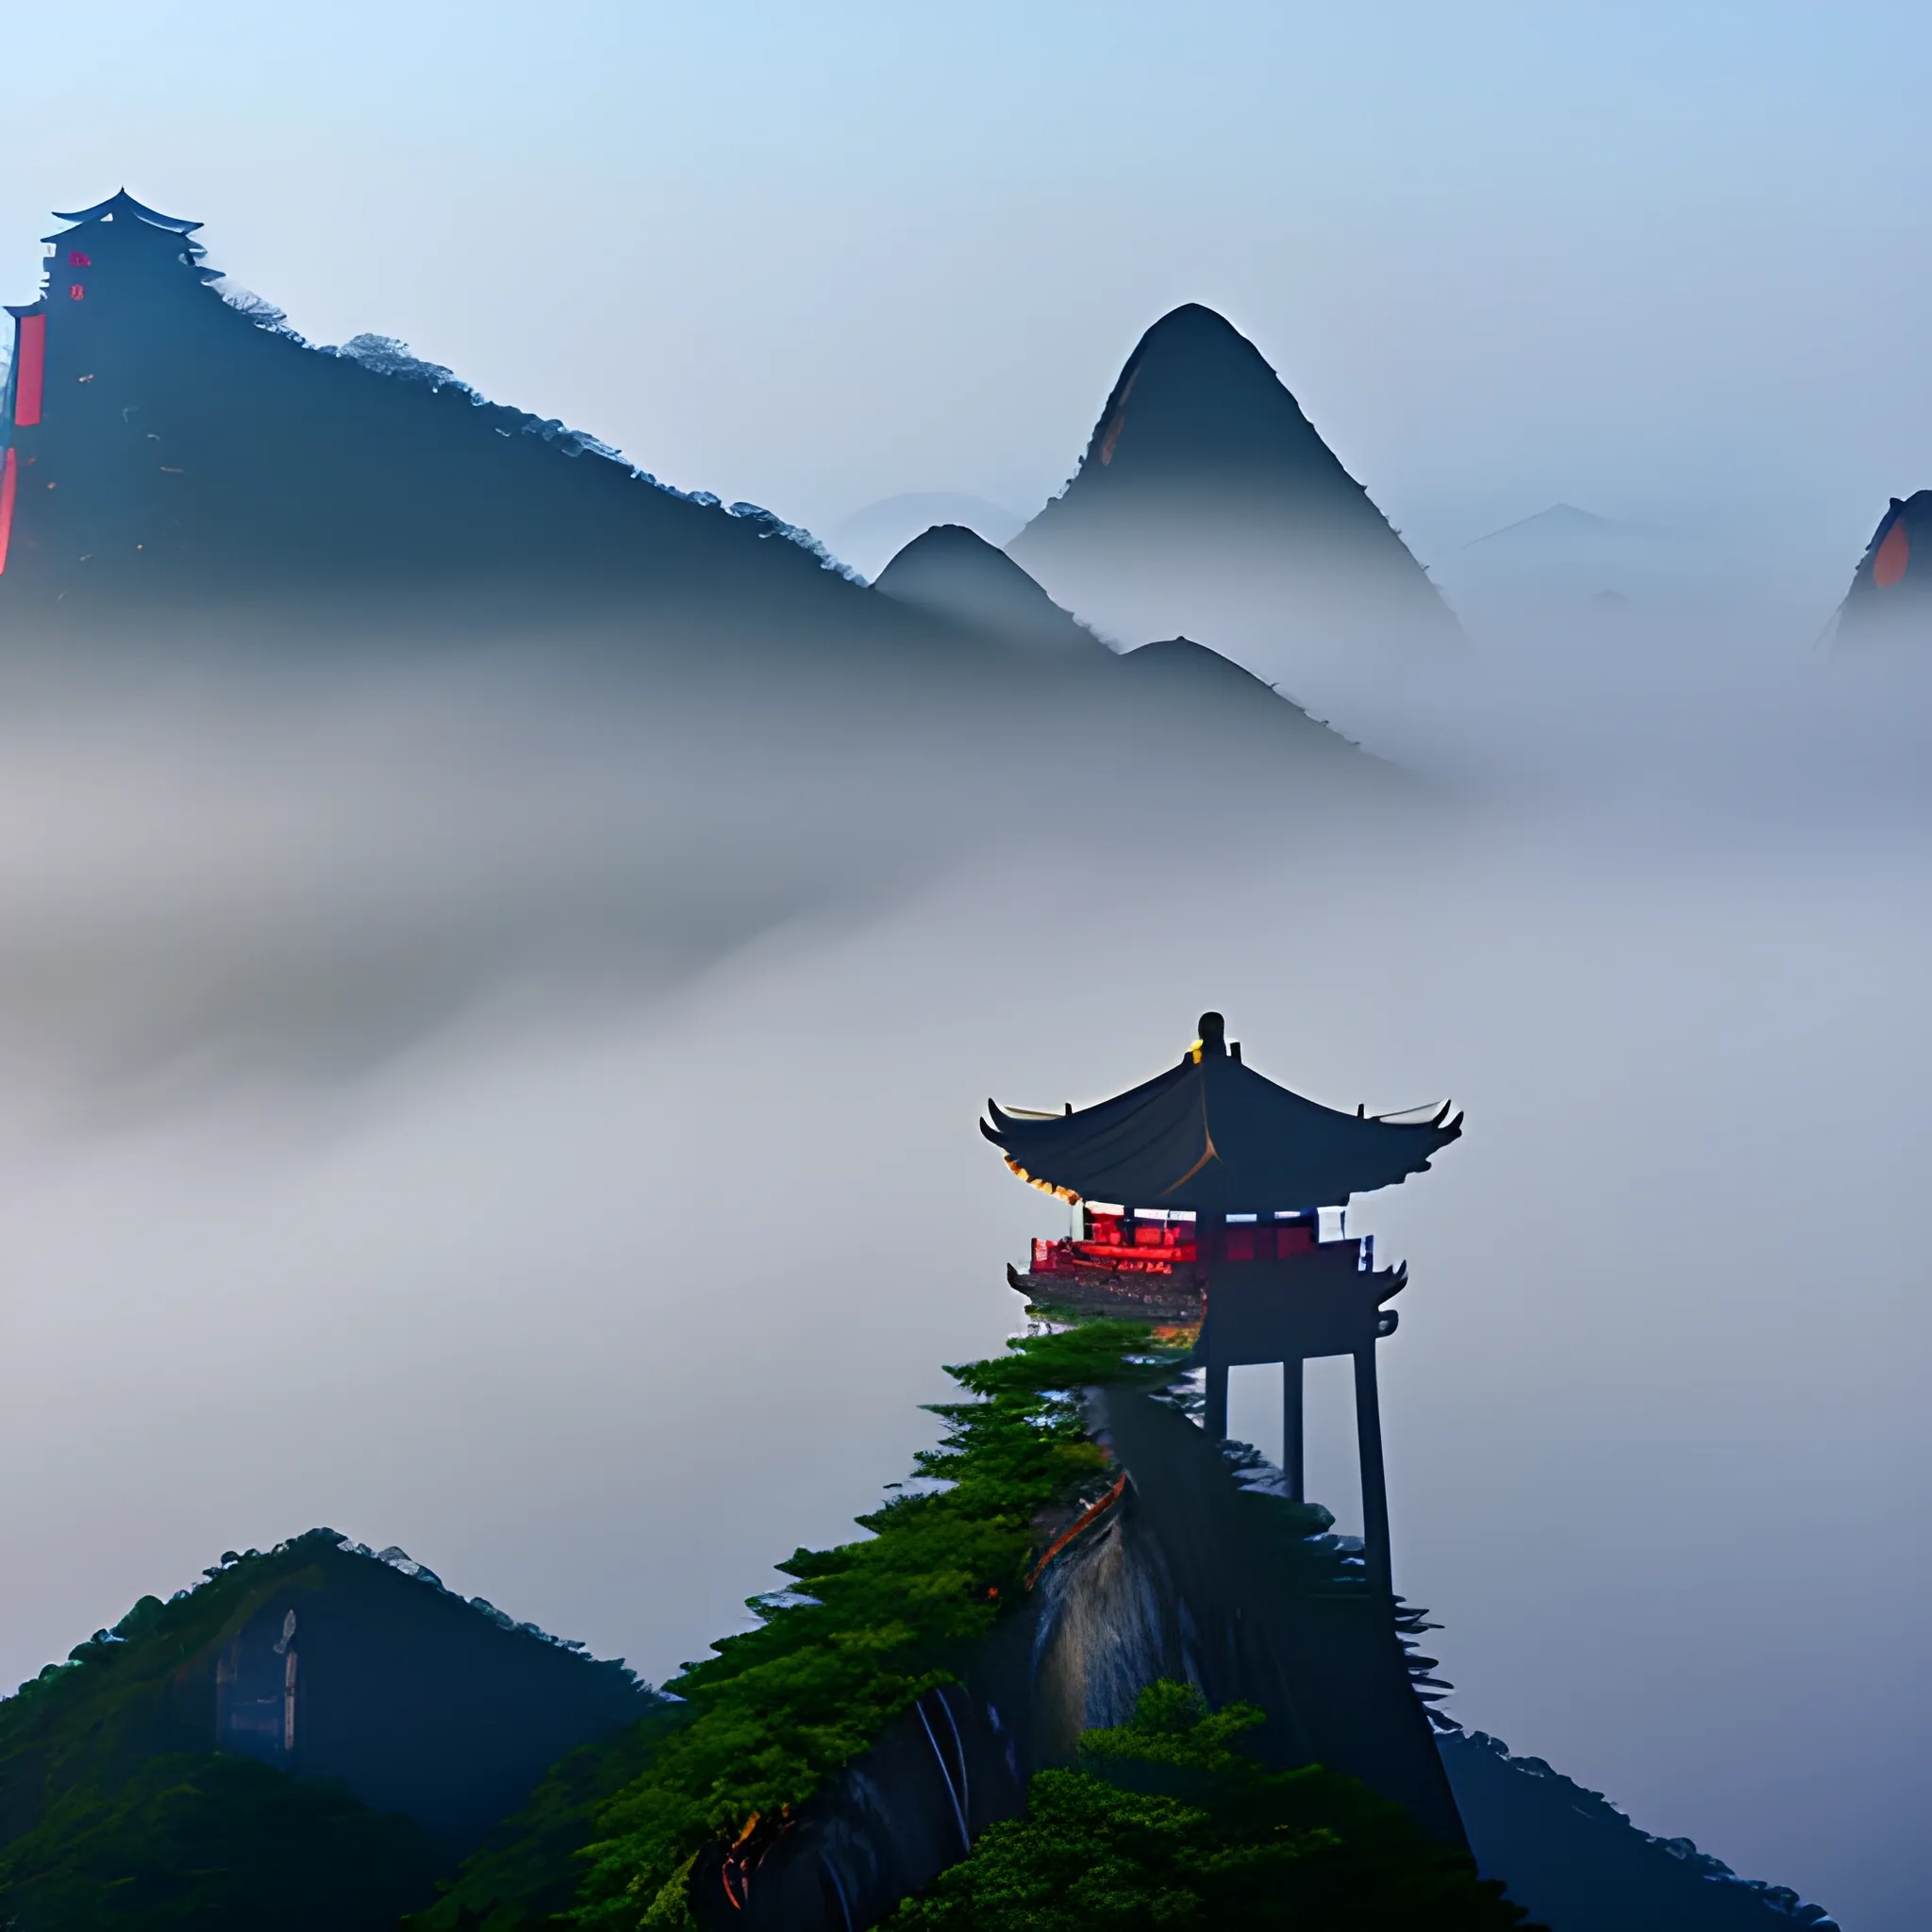 Chinese Huangshan mountain silhouette with a tiny pagoda on top of high mountains with fog